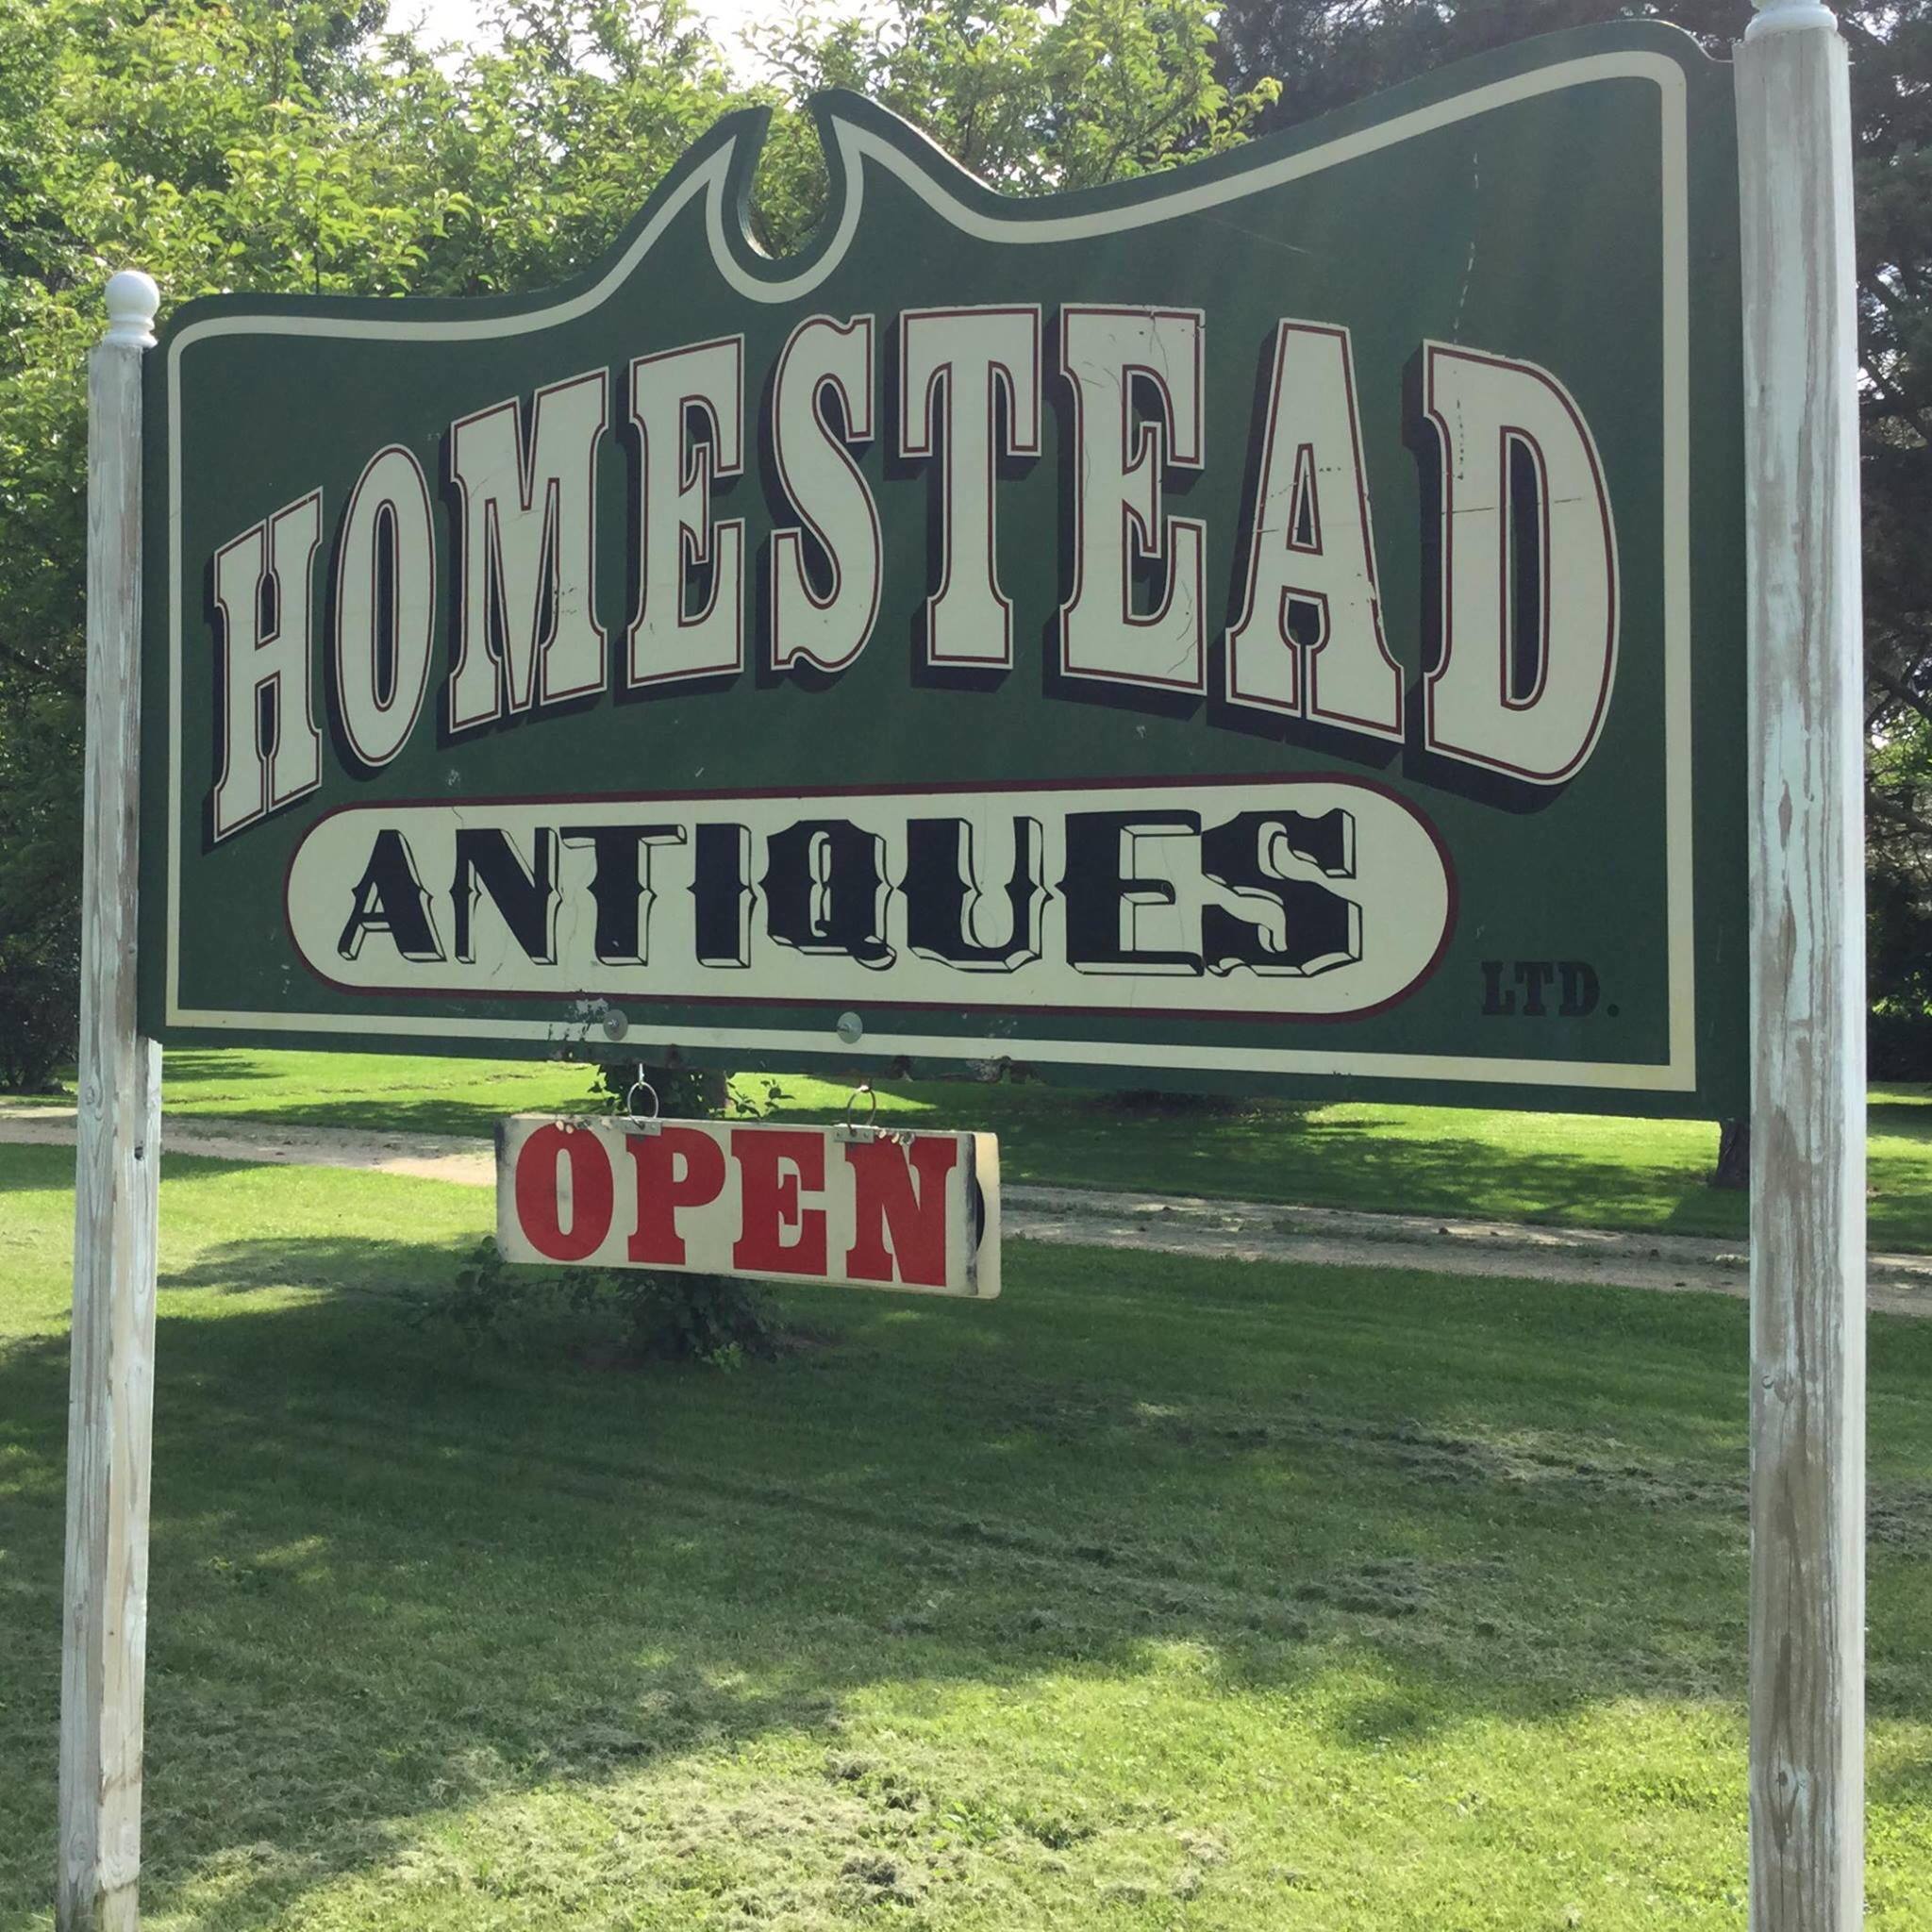 The Homestead Antiques and Home Furnishings